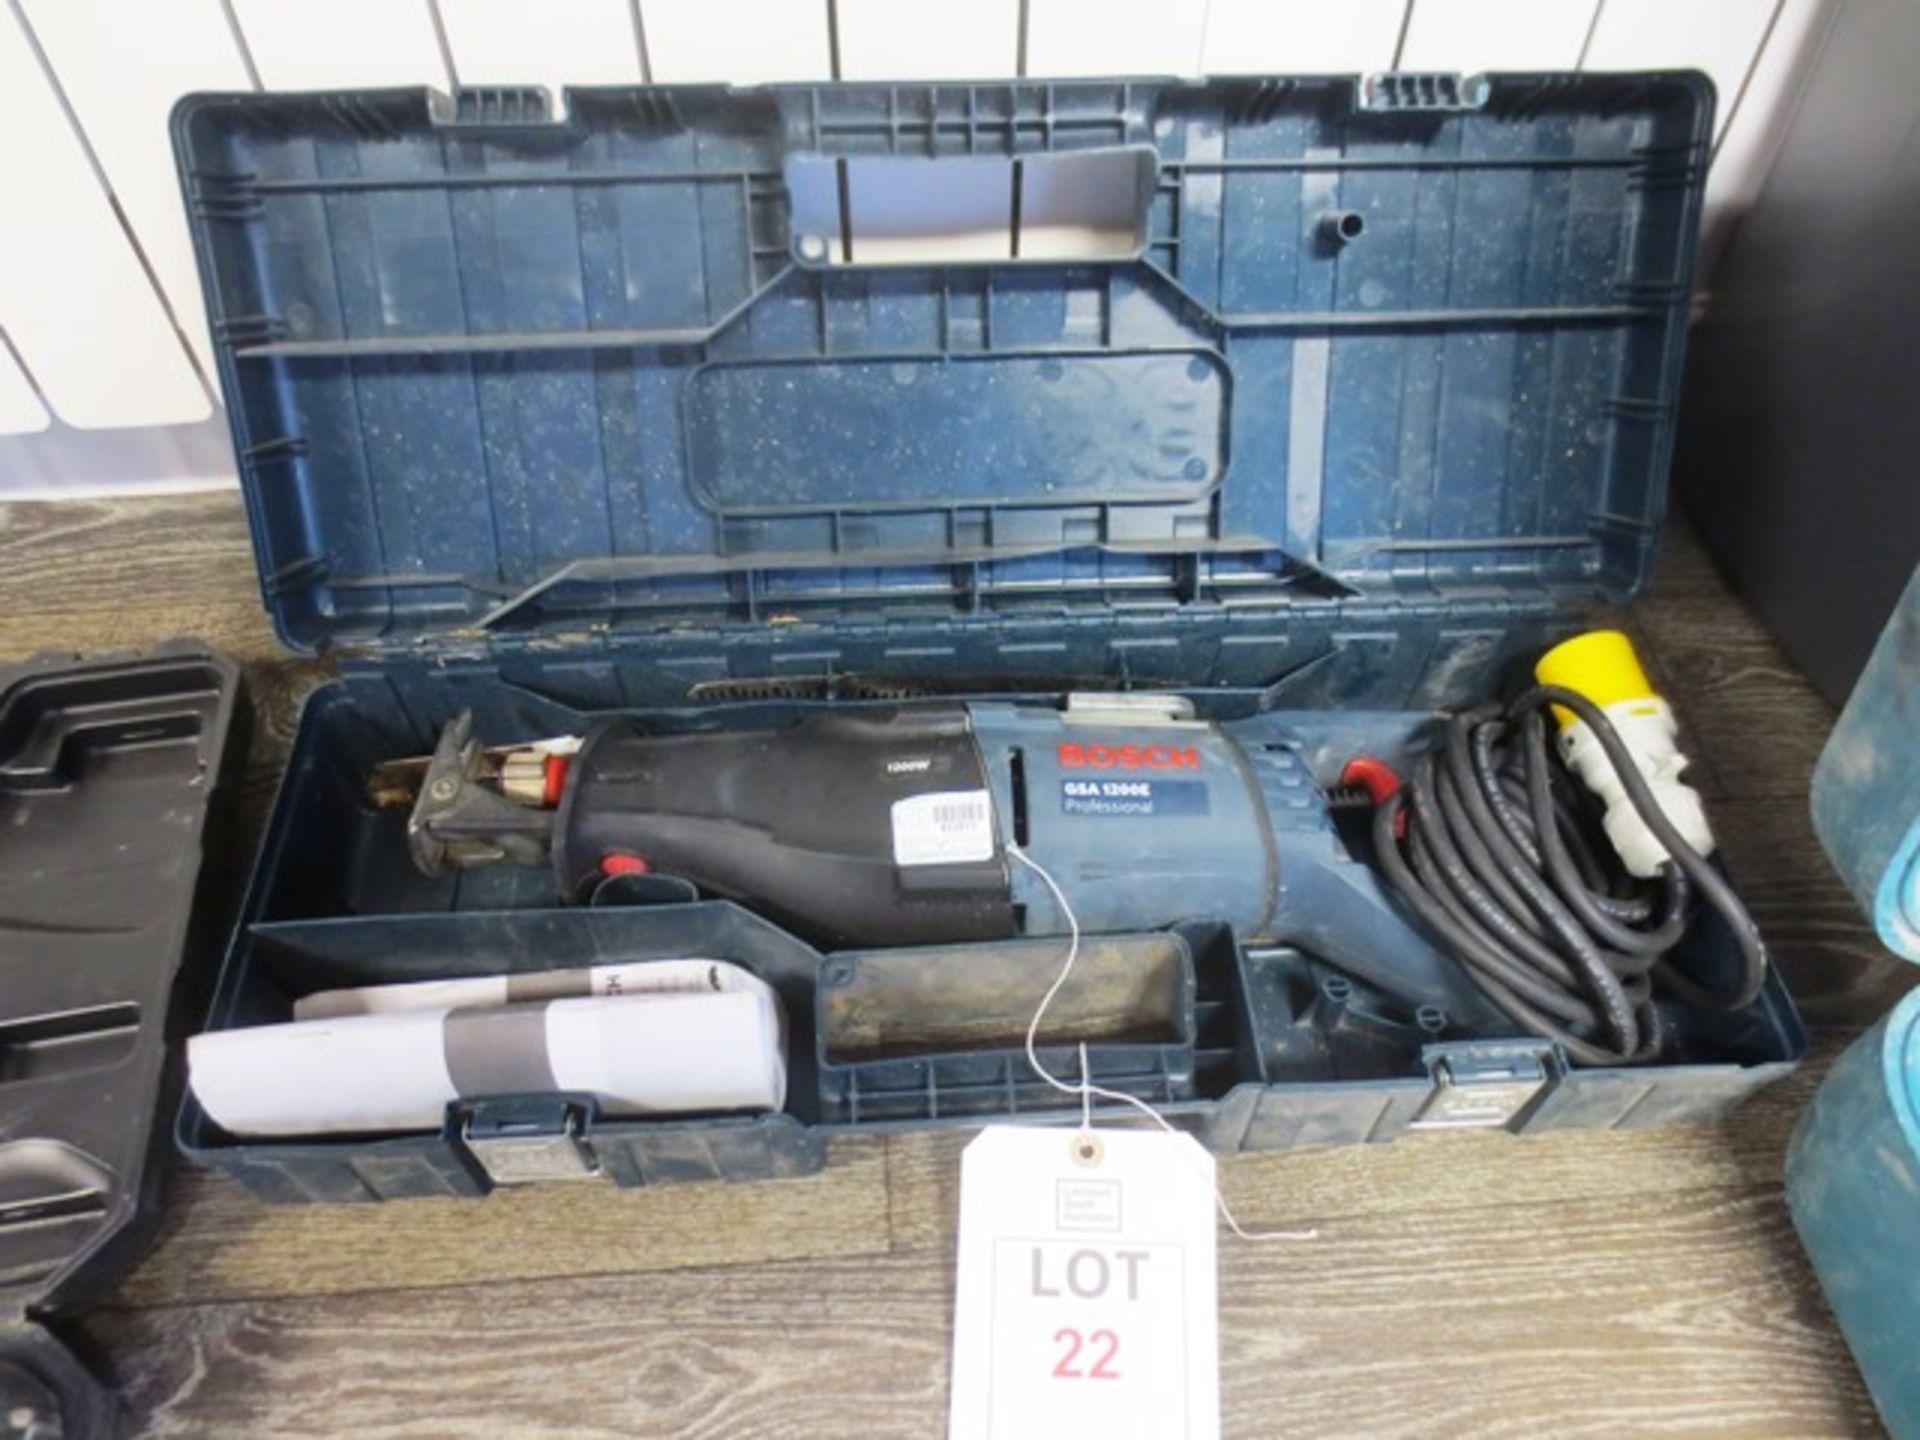 Bosch GSA 1200E reciprocating saw, 110v, with carry case and manual